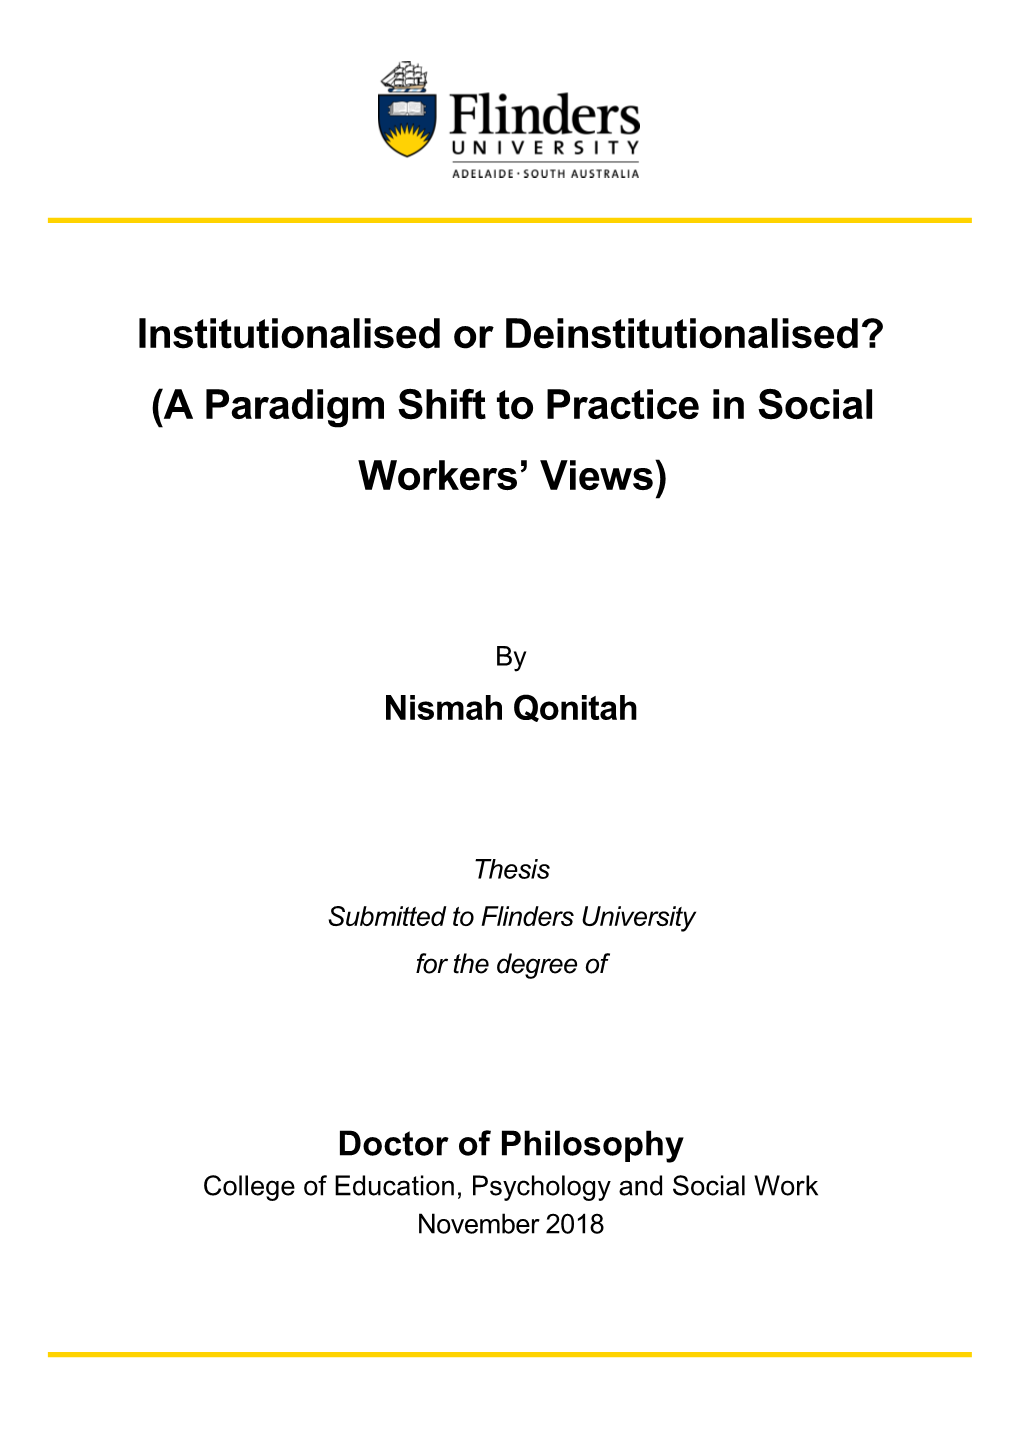 A Paradigm Shift to Practice in Social Workers' Views